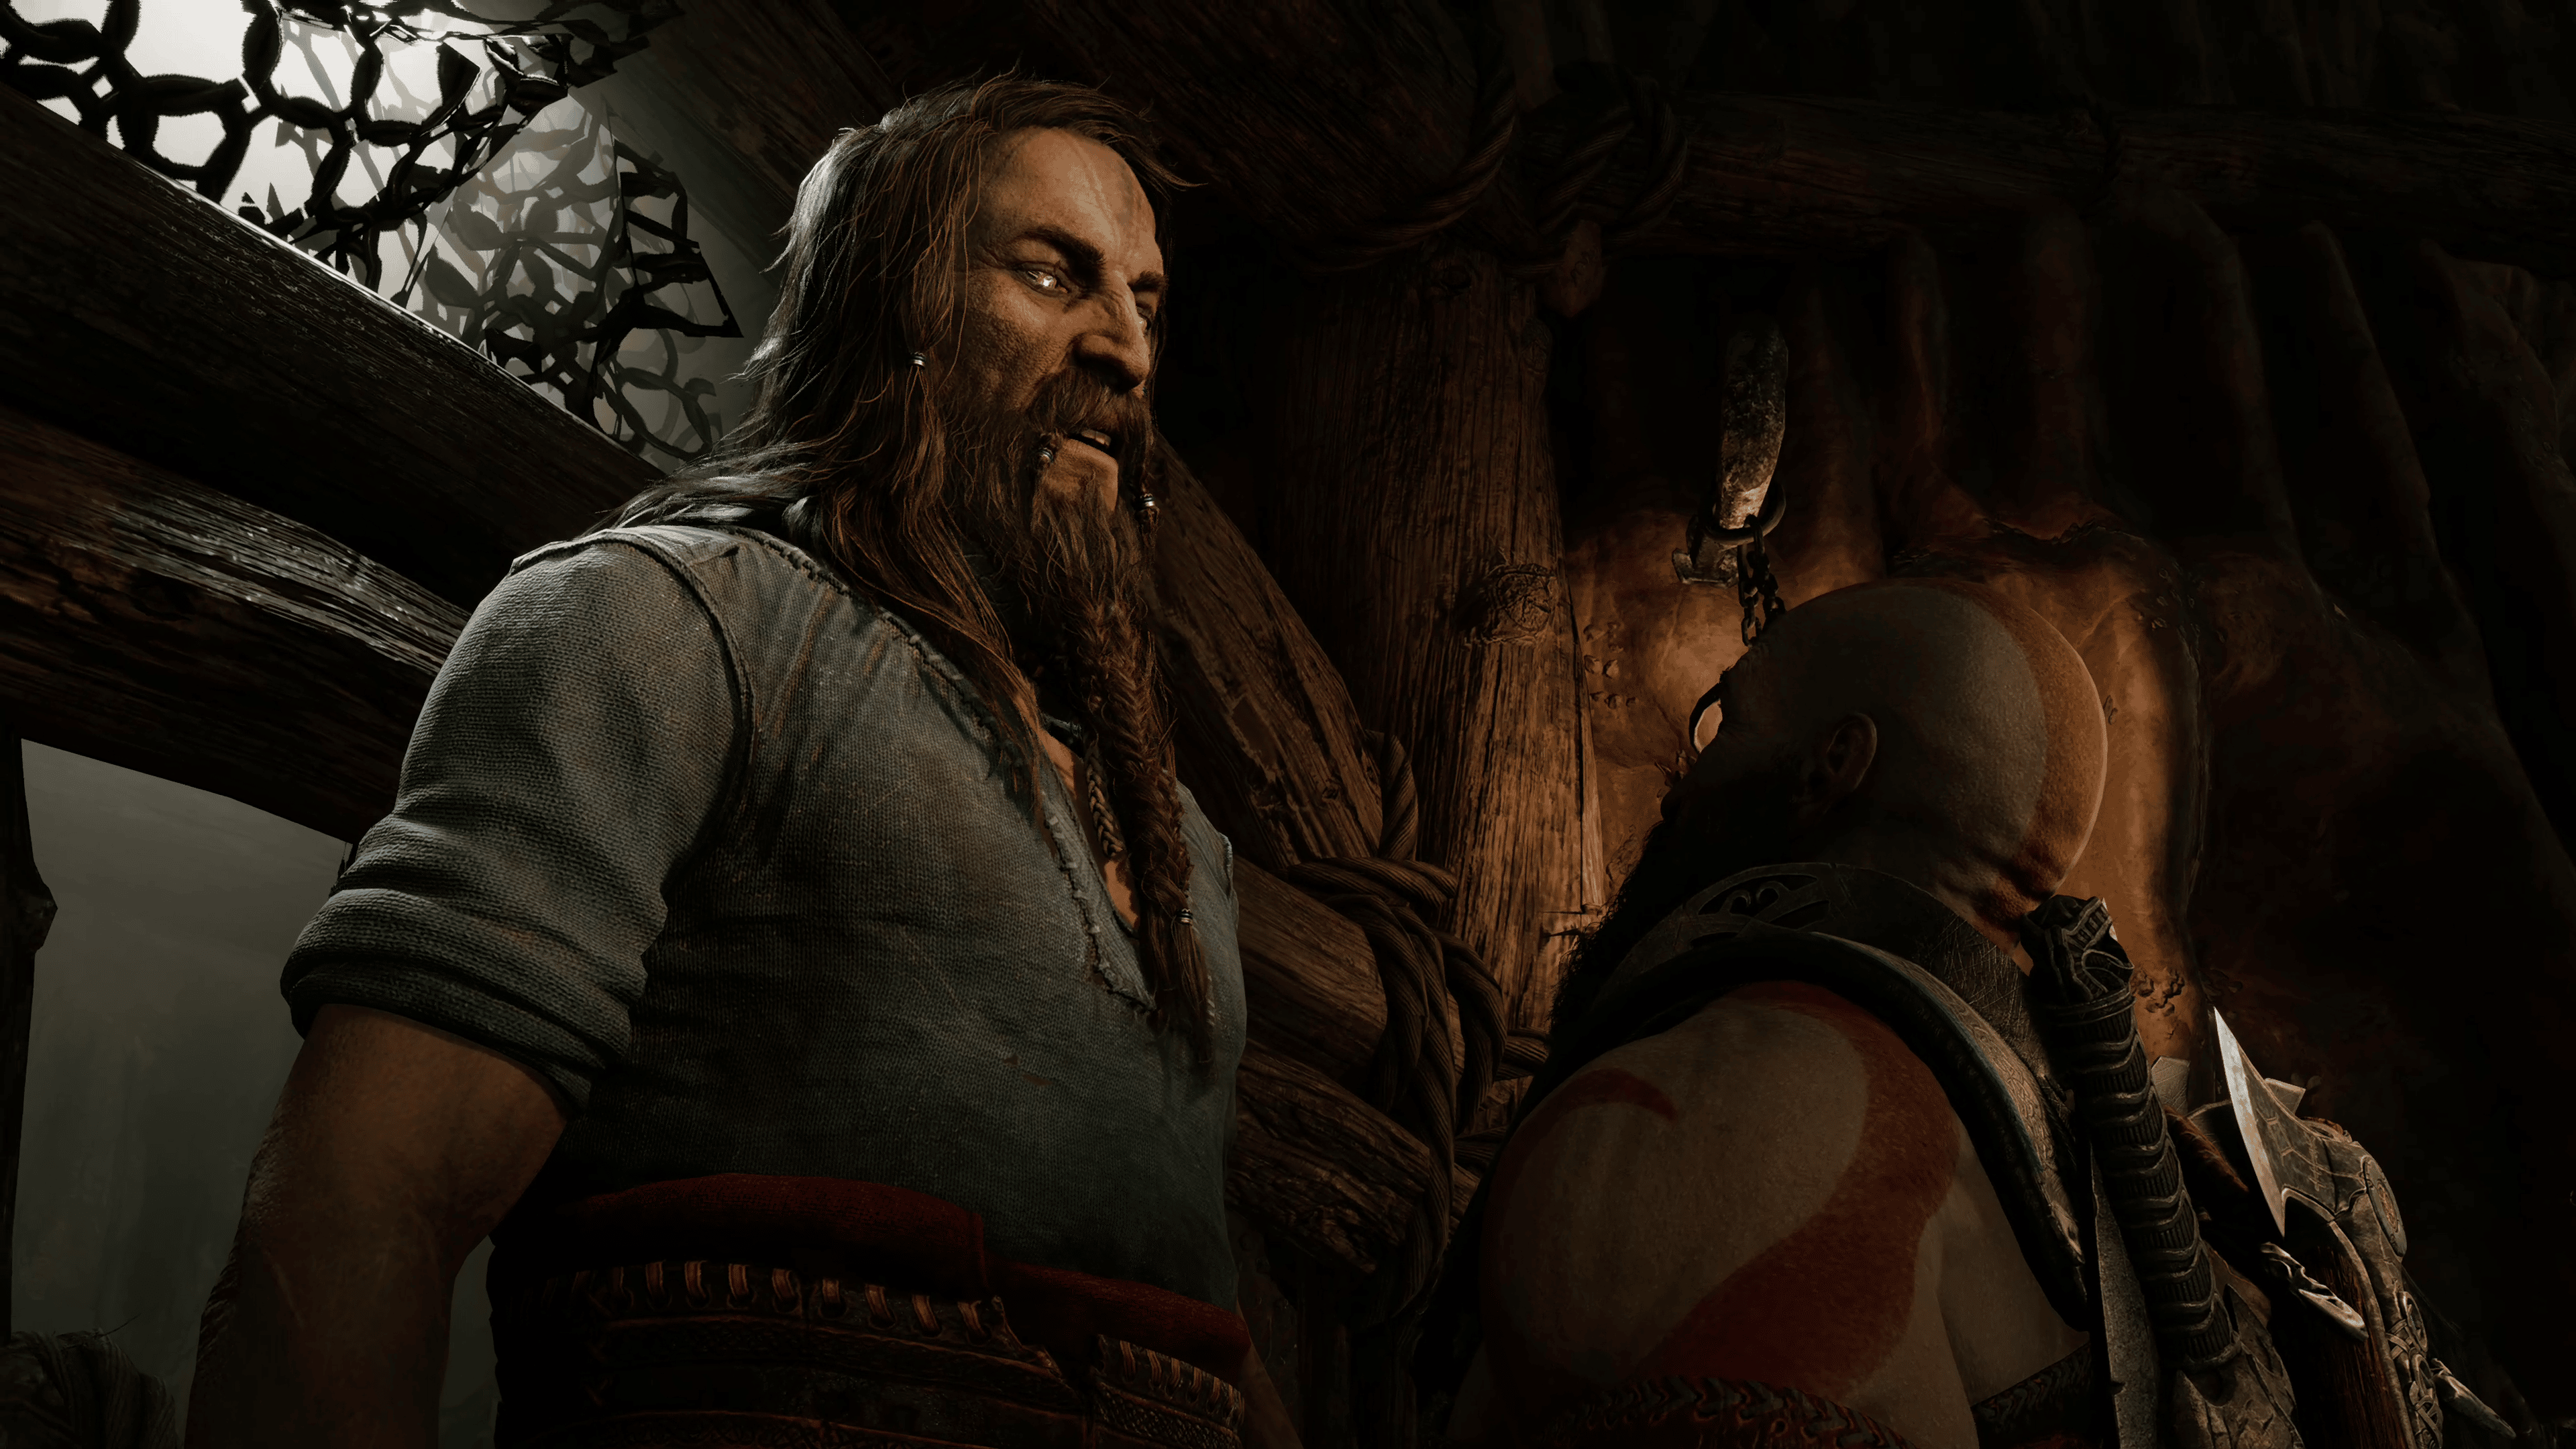 CALLING ALL GOD OF WAR FANS!!!! Richard Schiff, the voice of Odin